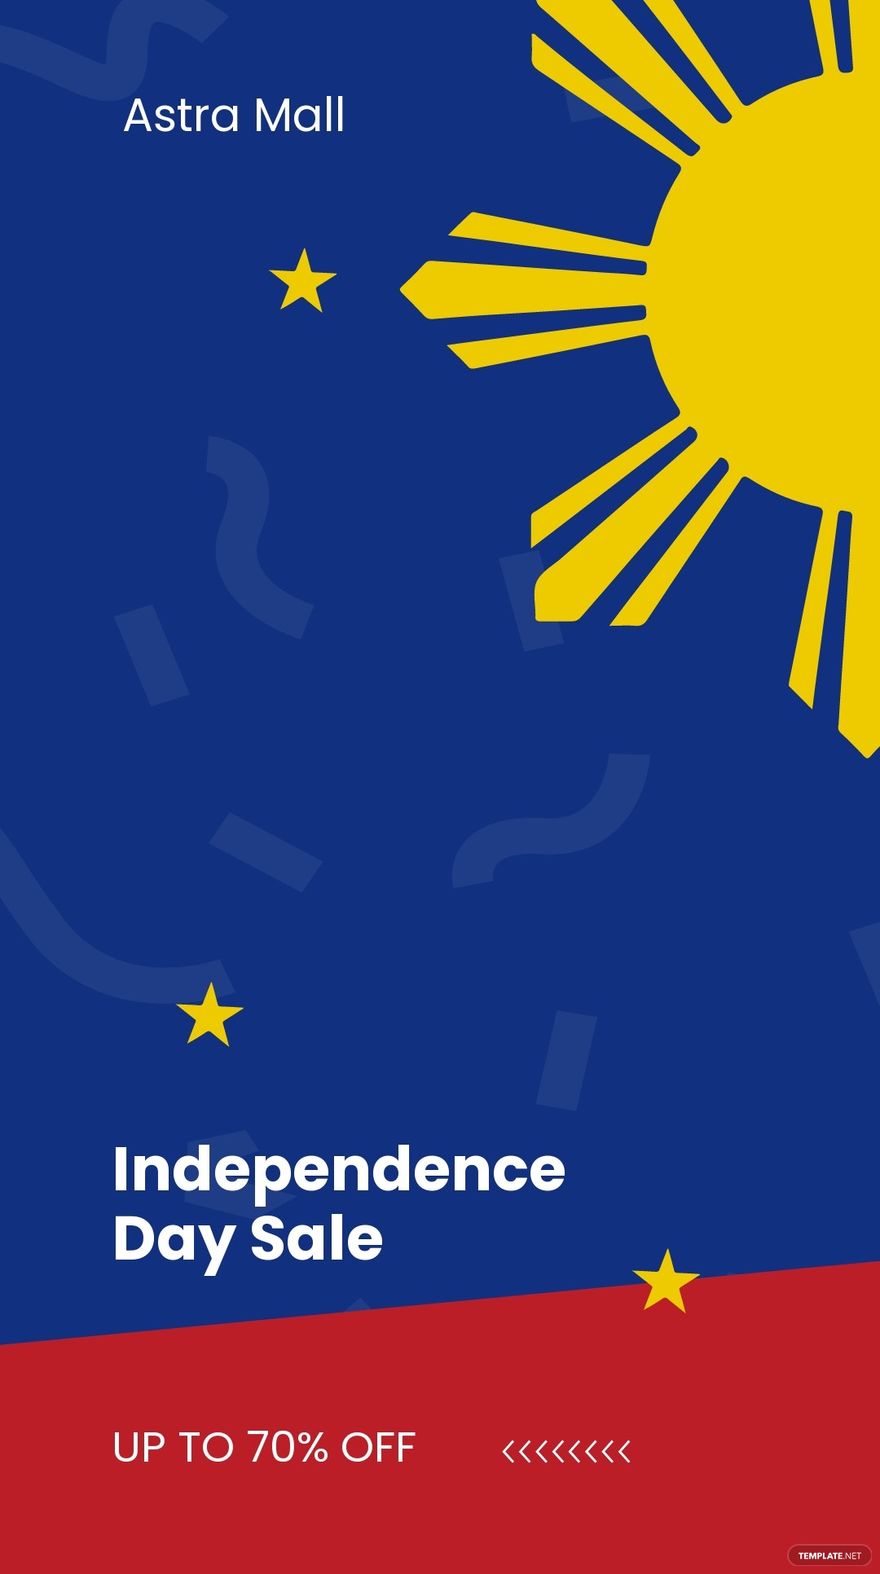 Philippines Independence Day Sale Snapchat Geofilter Template.jpe